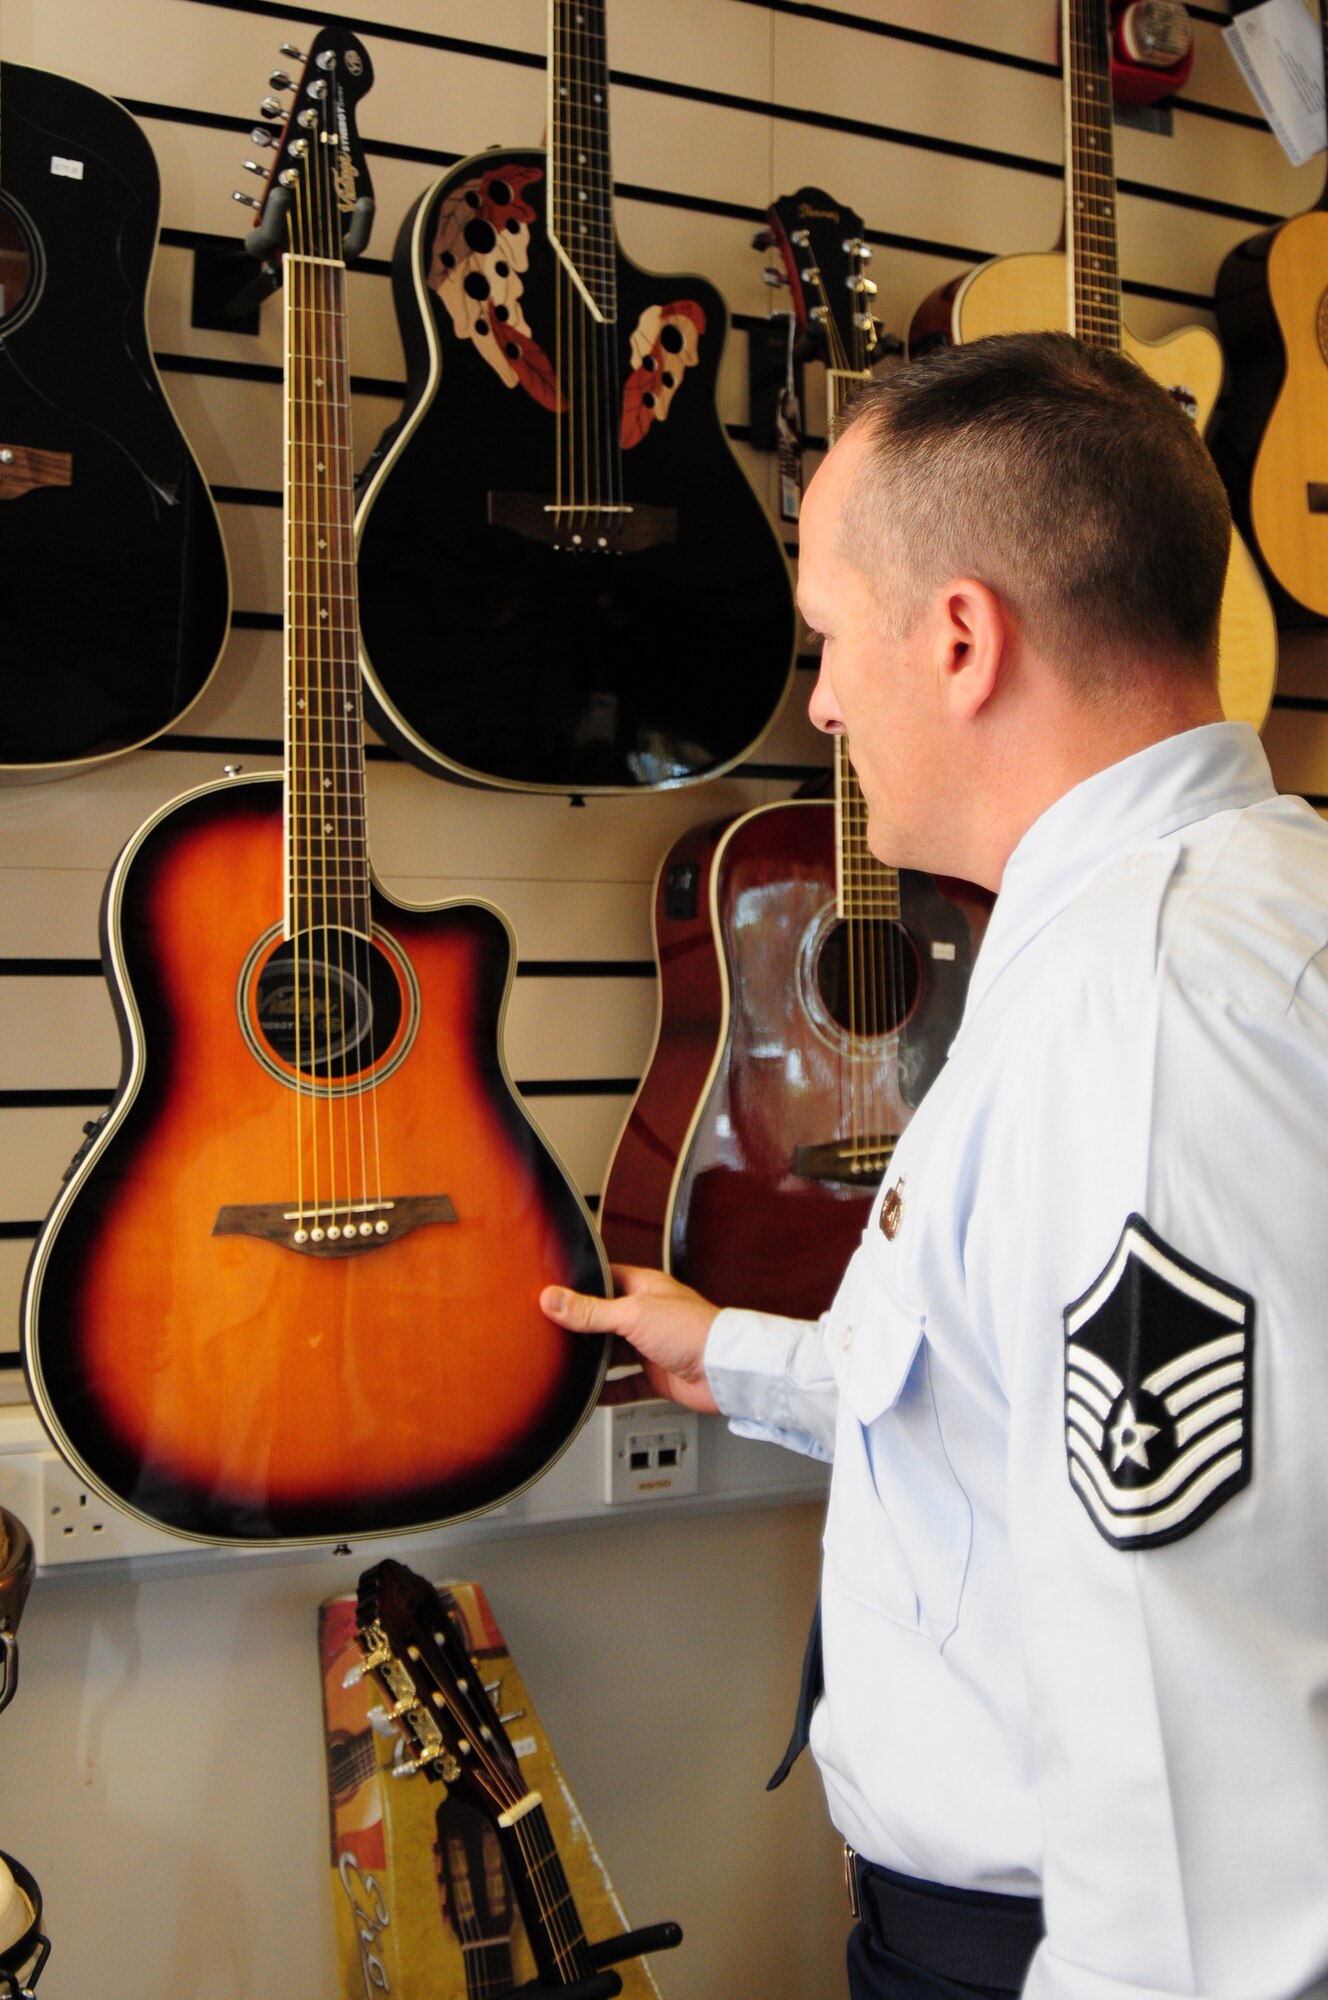 Master Sgt. Stephen Acker, 48th Operations Group Intelligence NCO in-charge of intelligence analysis, looks at the guitar selection at the Outdoor Recreation music store on RAF Lakenheath June 21. The music store provides various instruments as well as music books and different accessories to include amplifiers, tuners and cases. (U.S. Air Force photo/Airman 1st Class Lausanne Morgan)